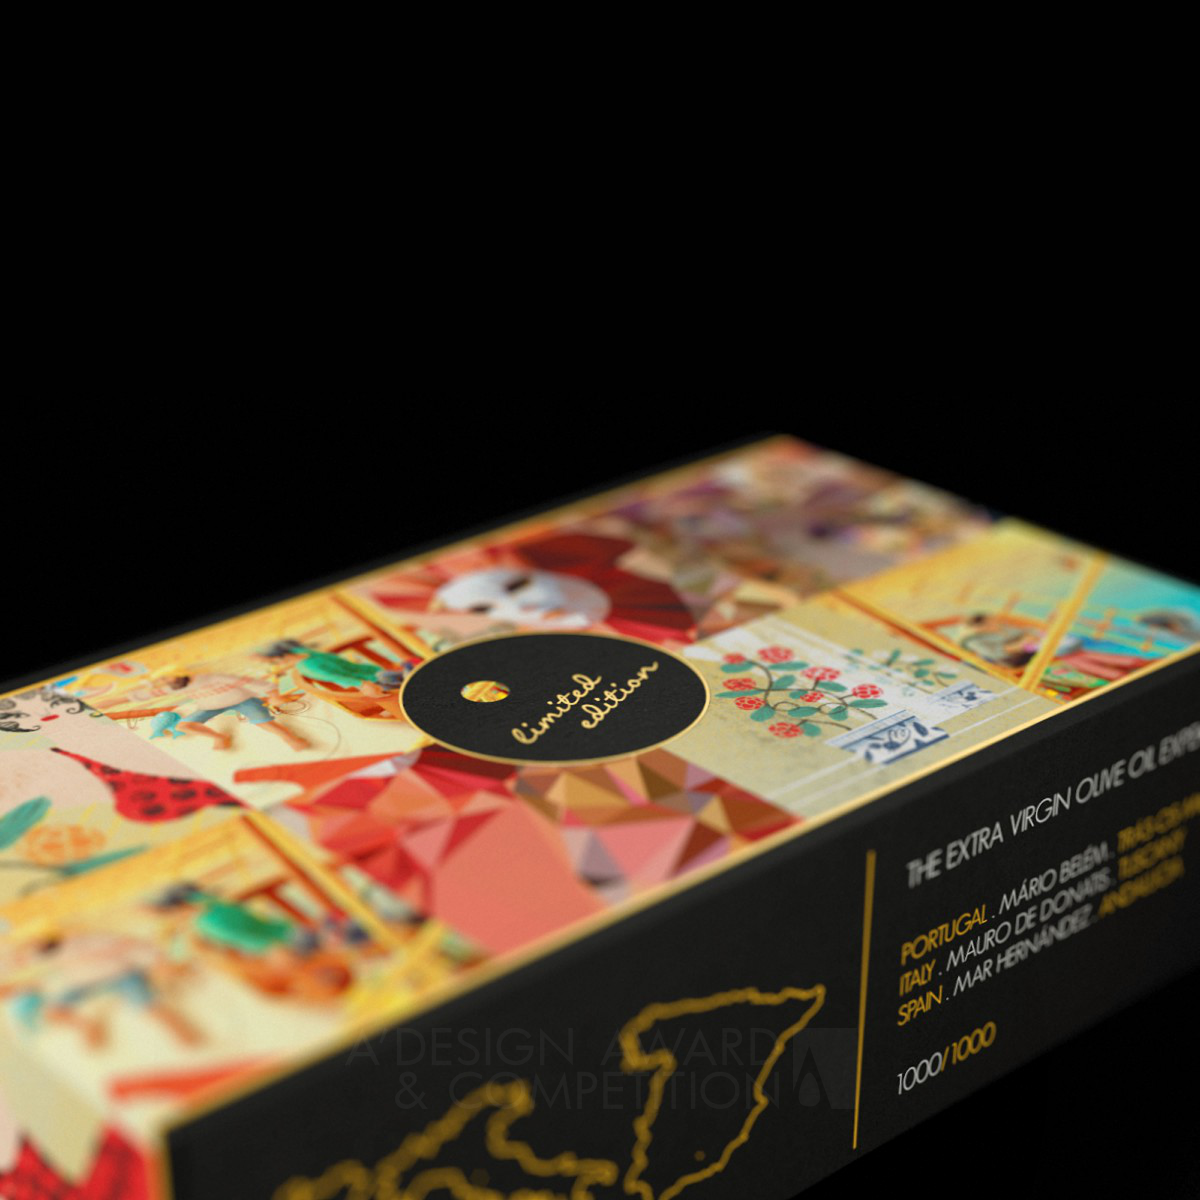 TGTL - THE OLIVE OIL EXPERIENCE Gift Box by Guilherme Jardim